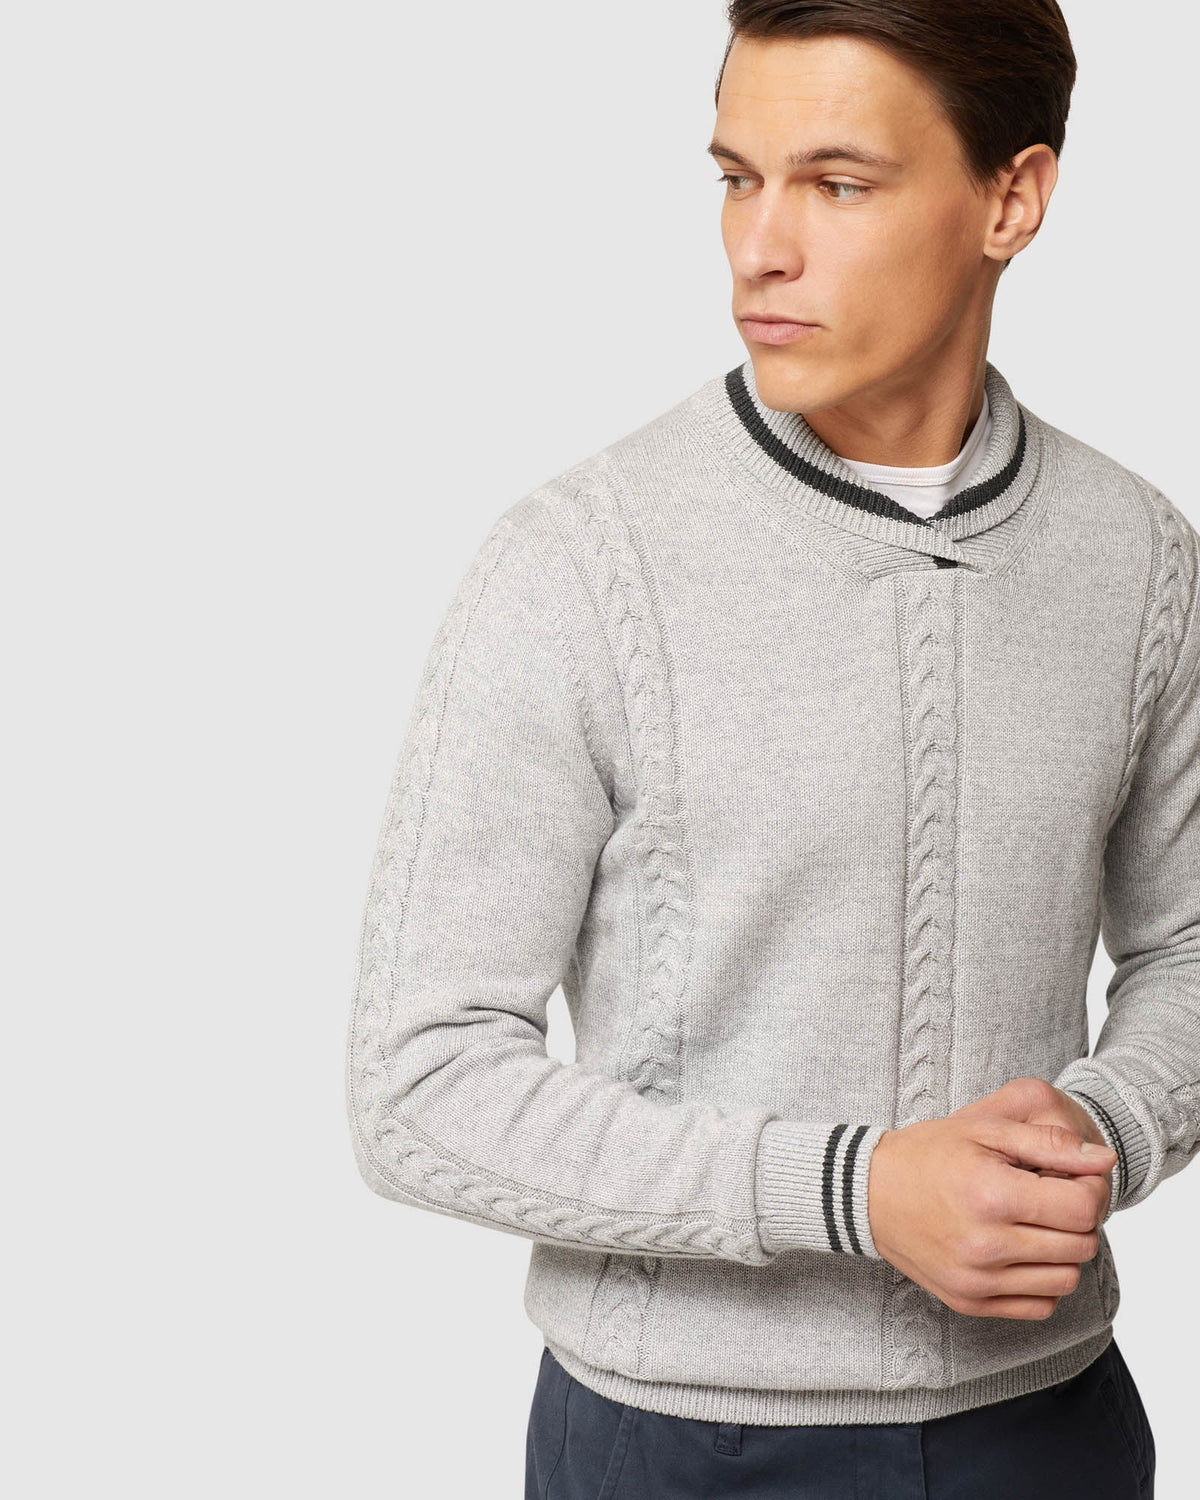 MILO COLLARED KNIT PULLOVER MENS KNITWEAR